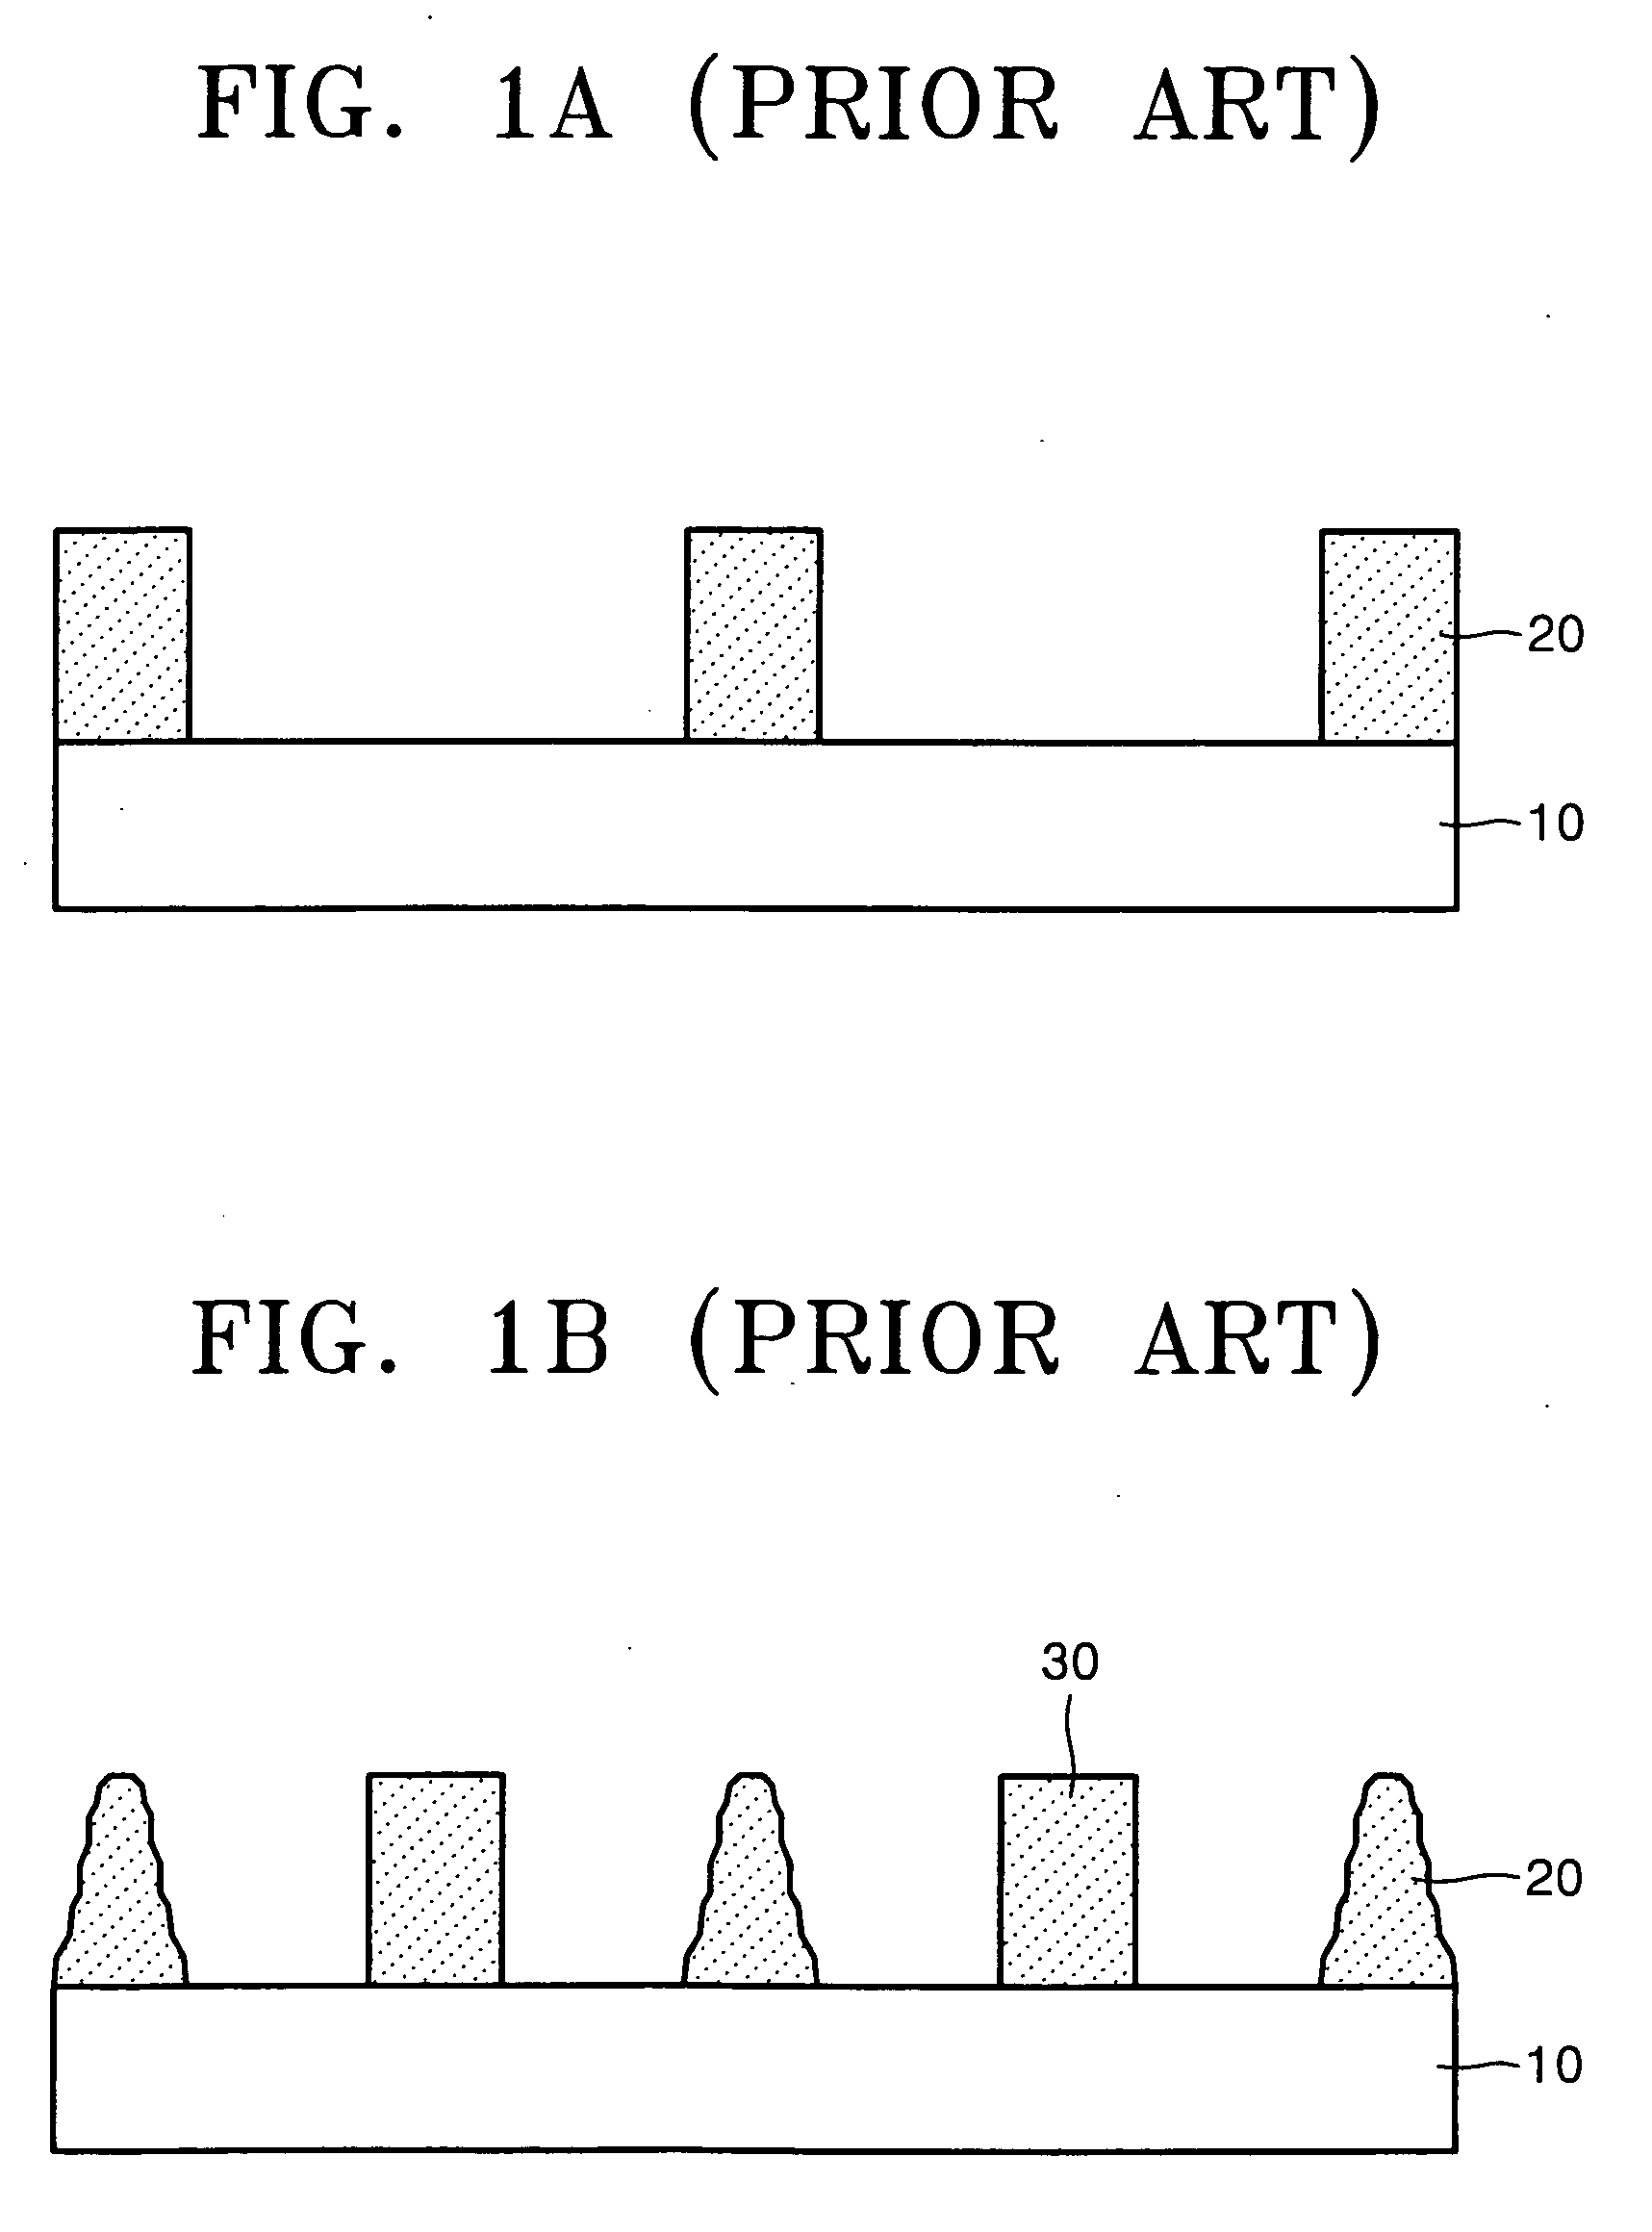 Method of forming fine pitch photoresist patterns using double patterning technique